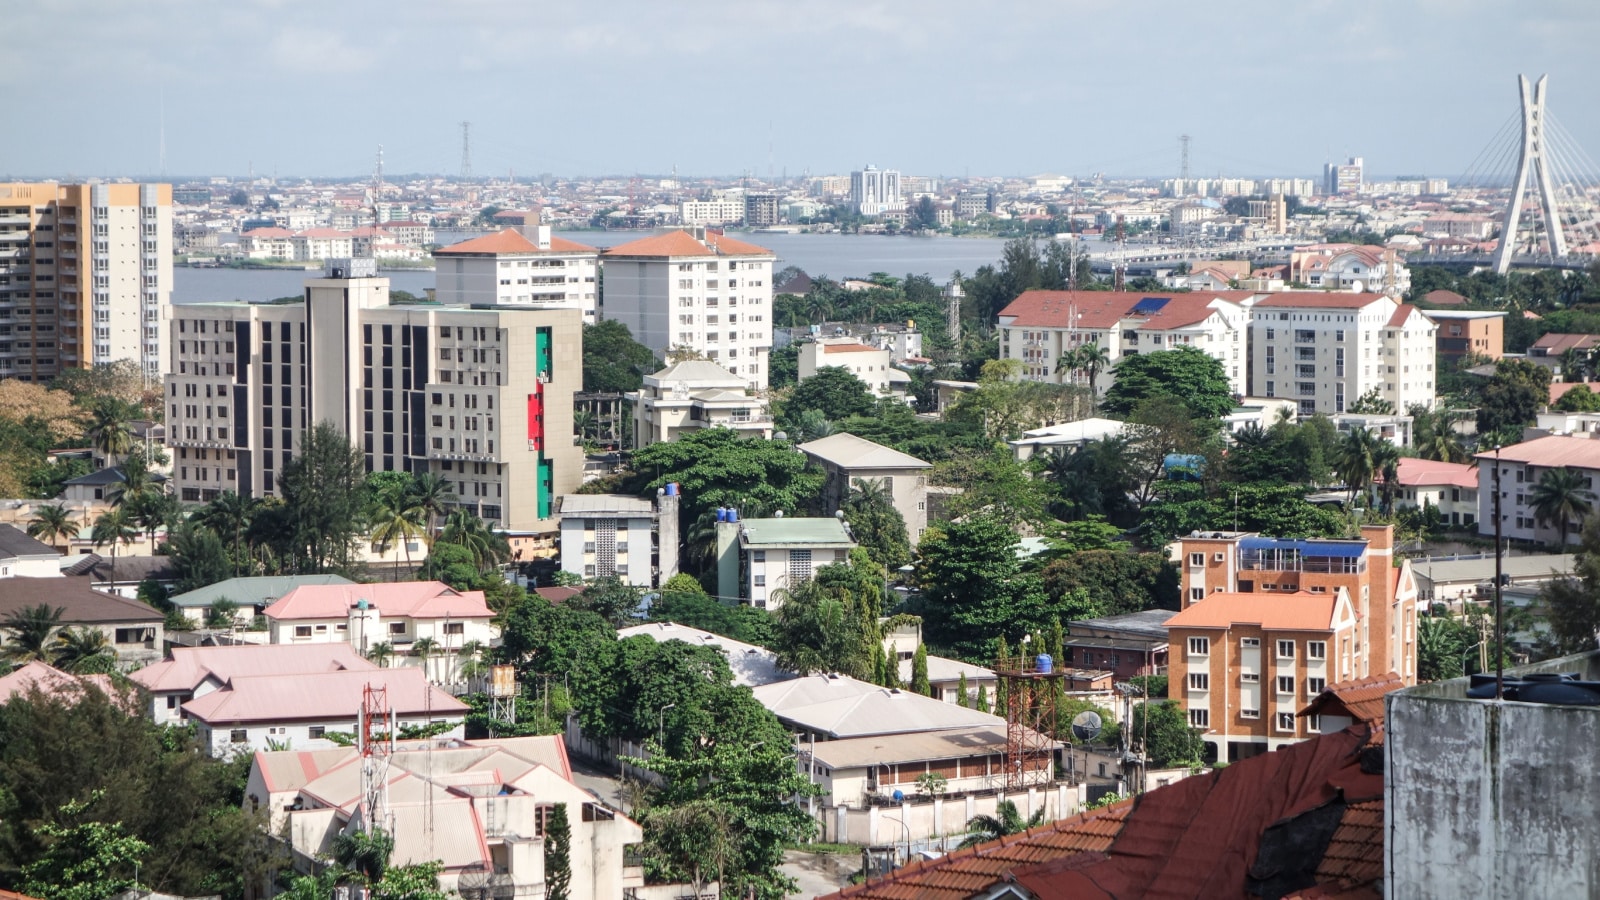 <p>Step into Lagos, Nigeria, and you’ll find yourself in what one user boldly describes as the epitome of ugliness. They point out the city’s terrible air quality, overcrowding, and lack of cleanliness. According to the user, Americans don’t truly know what “real ugly” is until they visit developing countries like Lagos.</p>